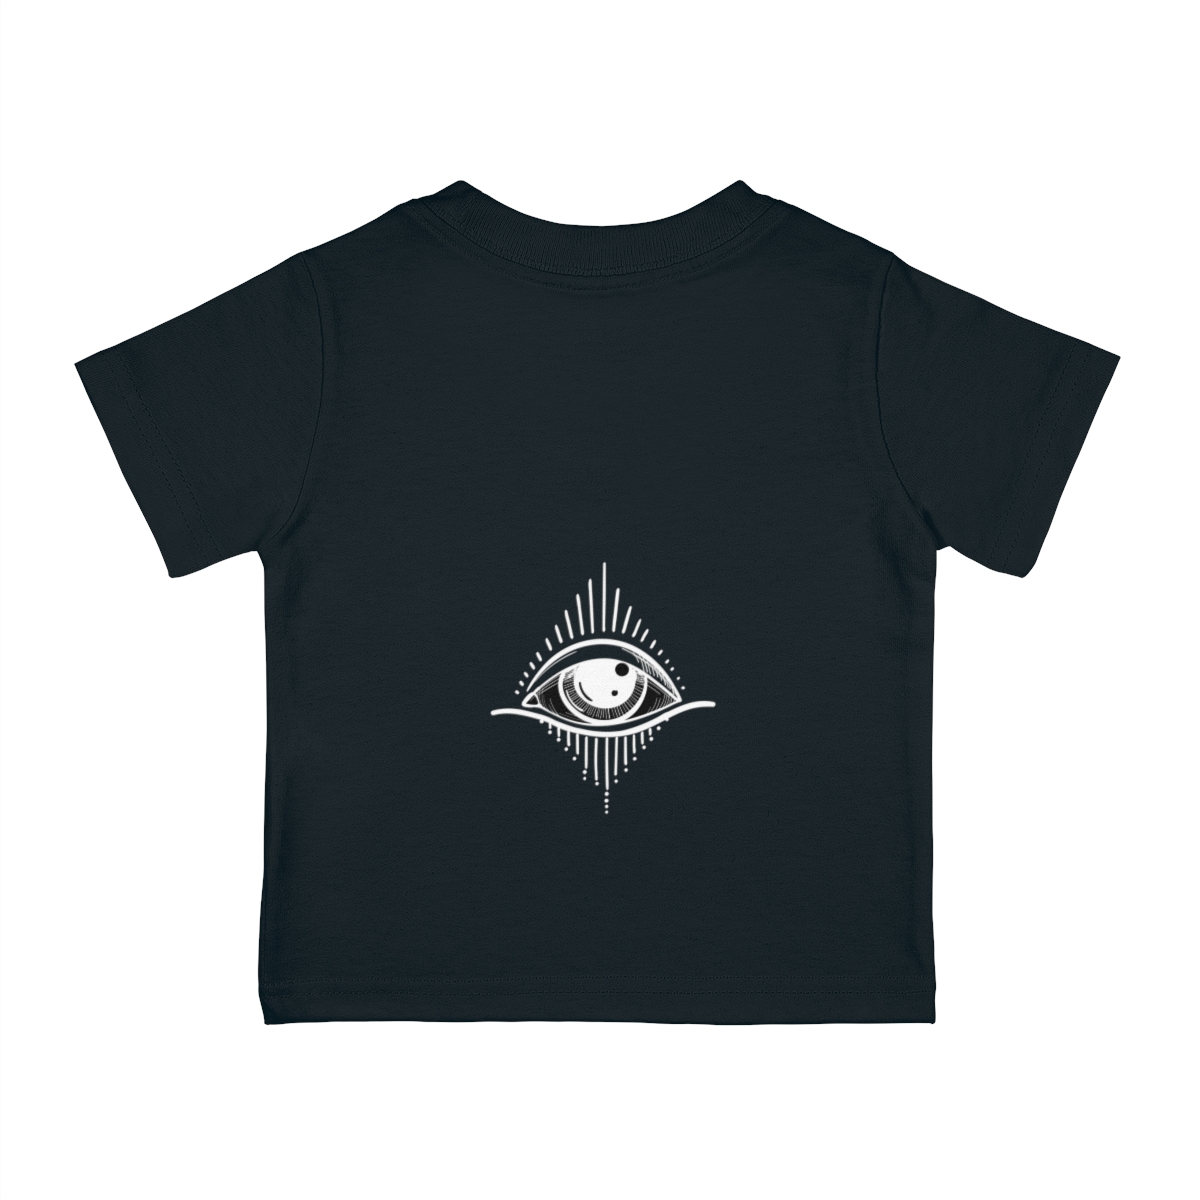 Little Starseed T-Shirt  product thumbnail image